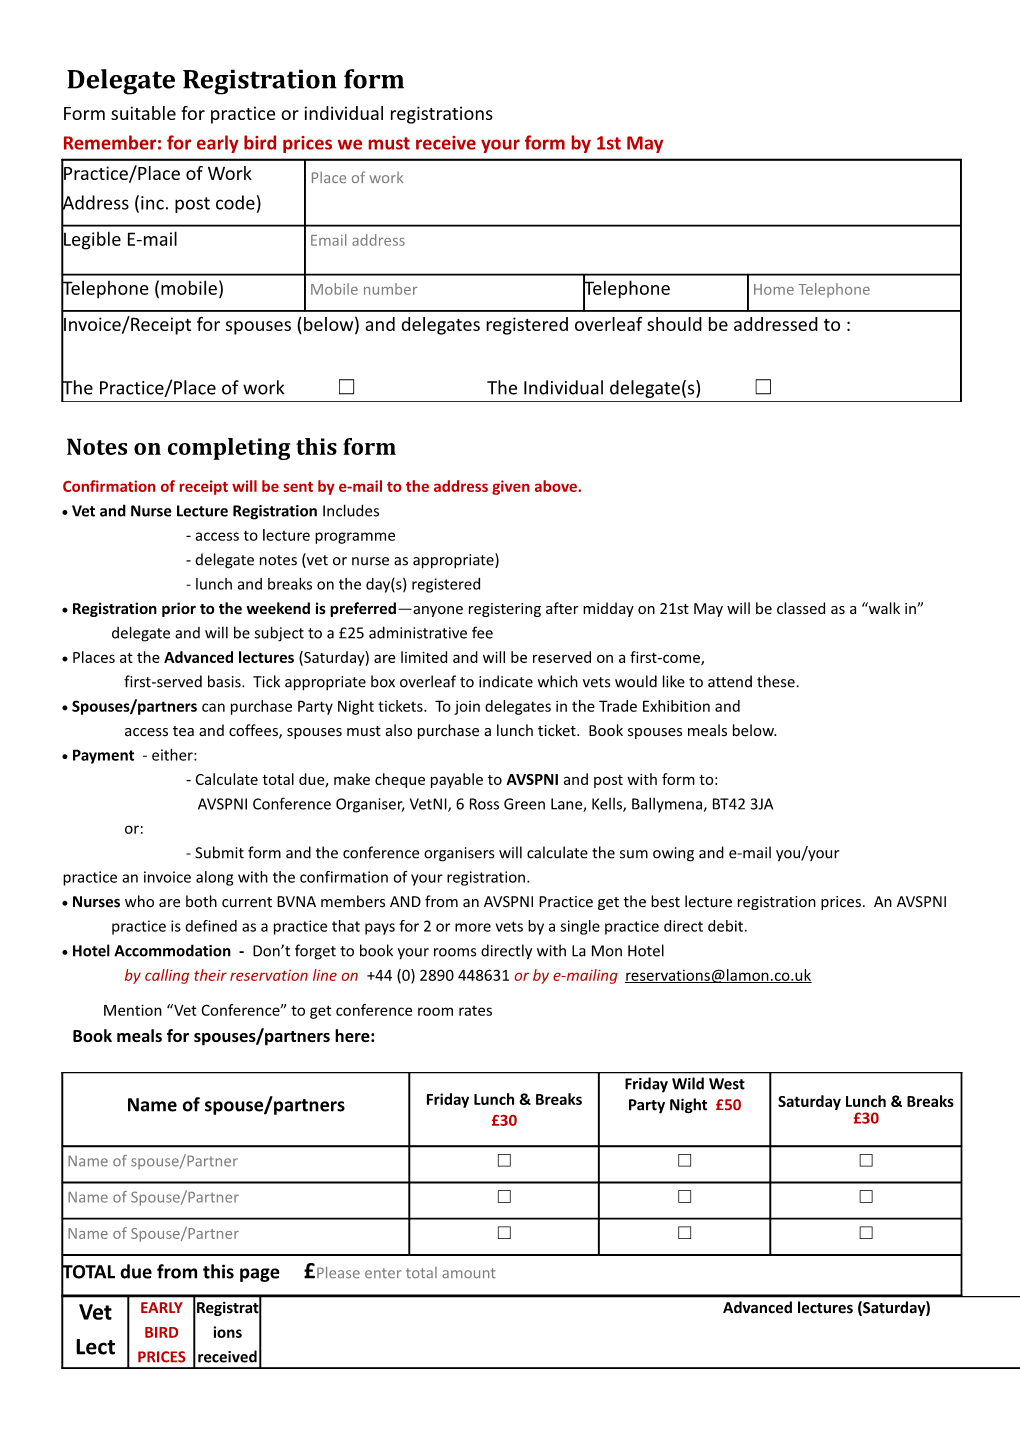 Form Suitable for Practice Or Individual Registrations